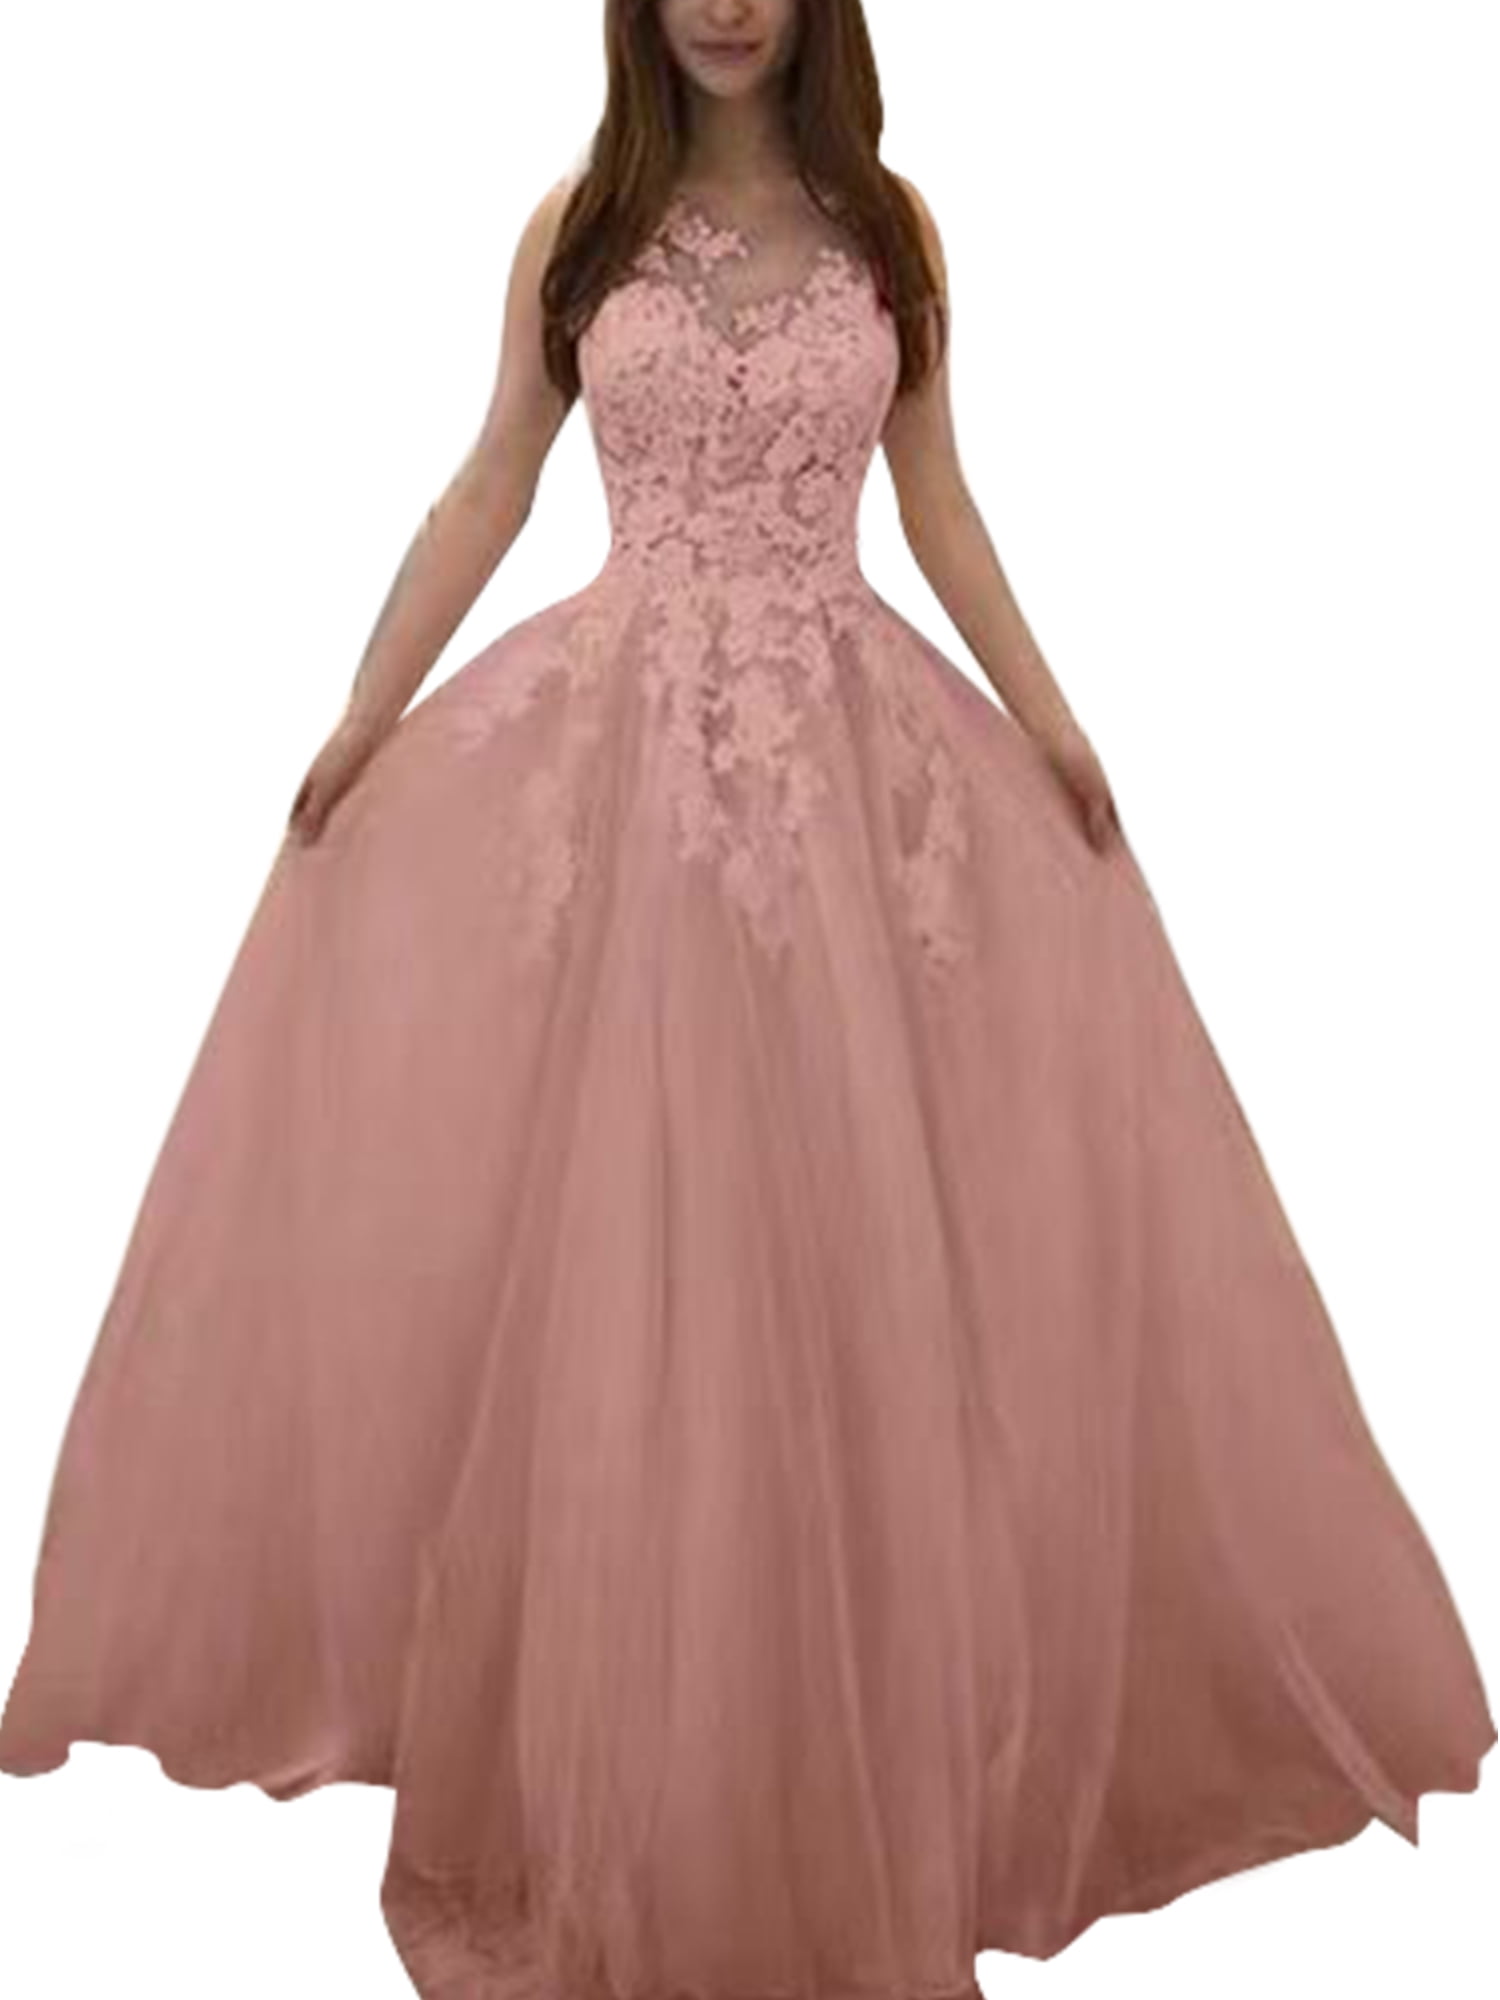 Long Chiffon Lace Evening Formal Party Ball Gown Prom Bridesmaid Dress Size 6 ~ 26 